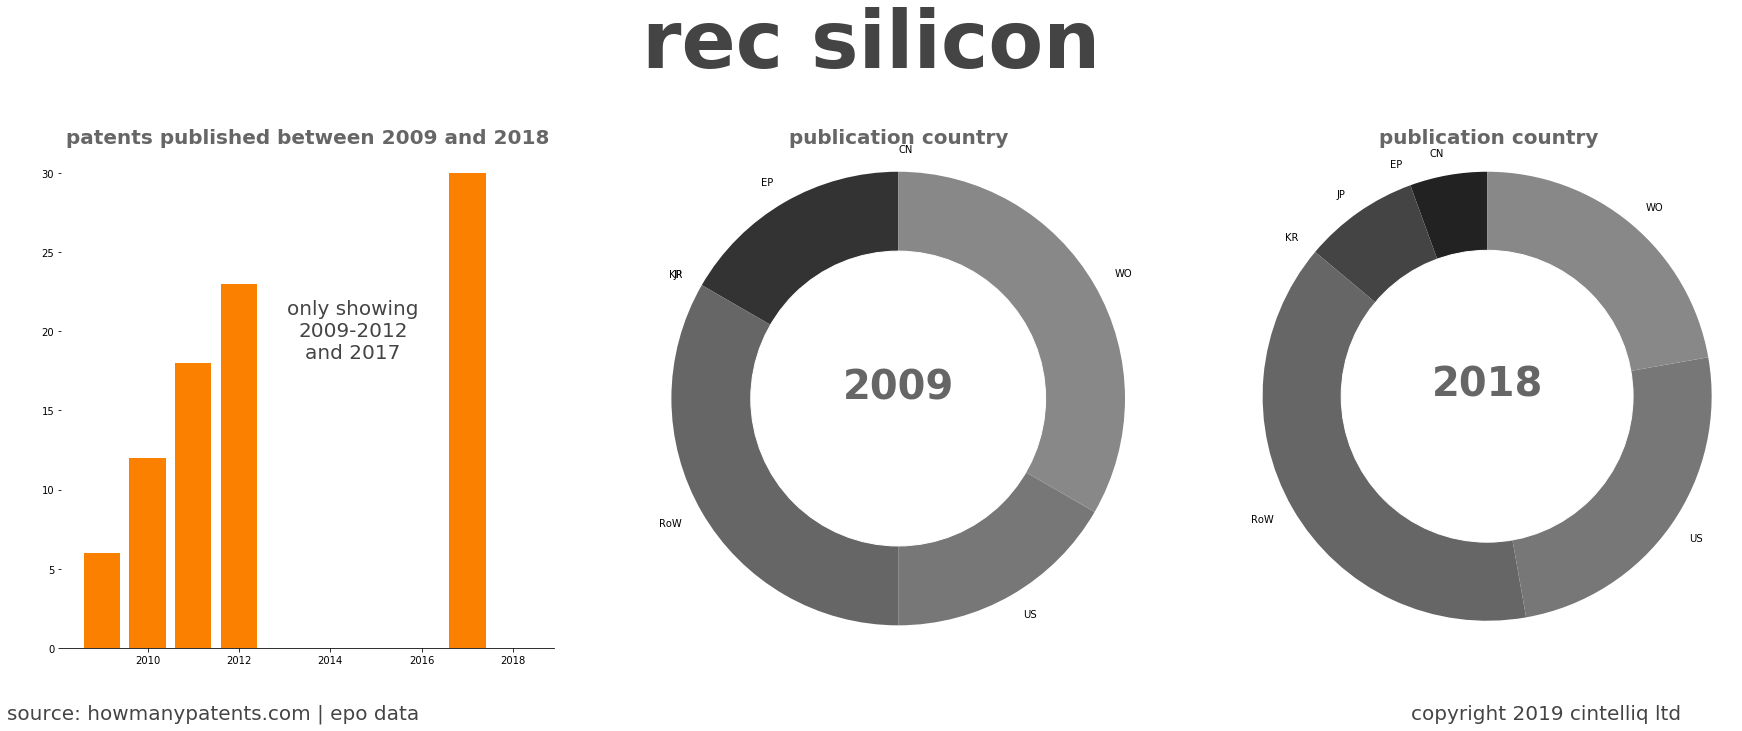 summary of patents for Rec Silicon